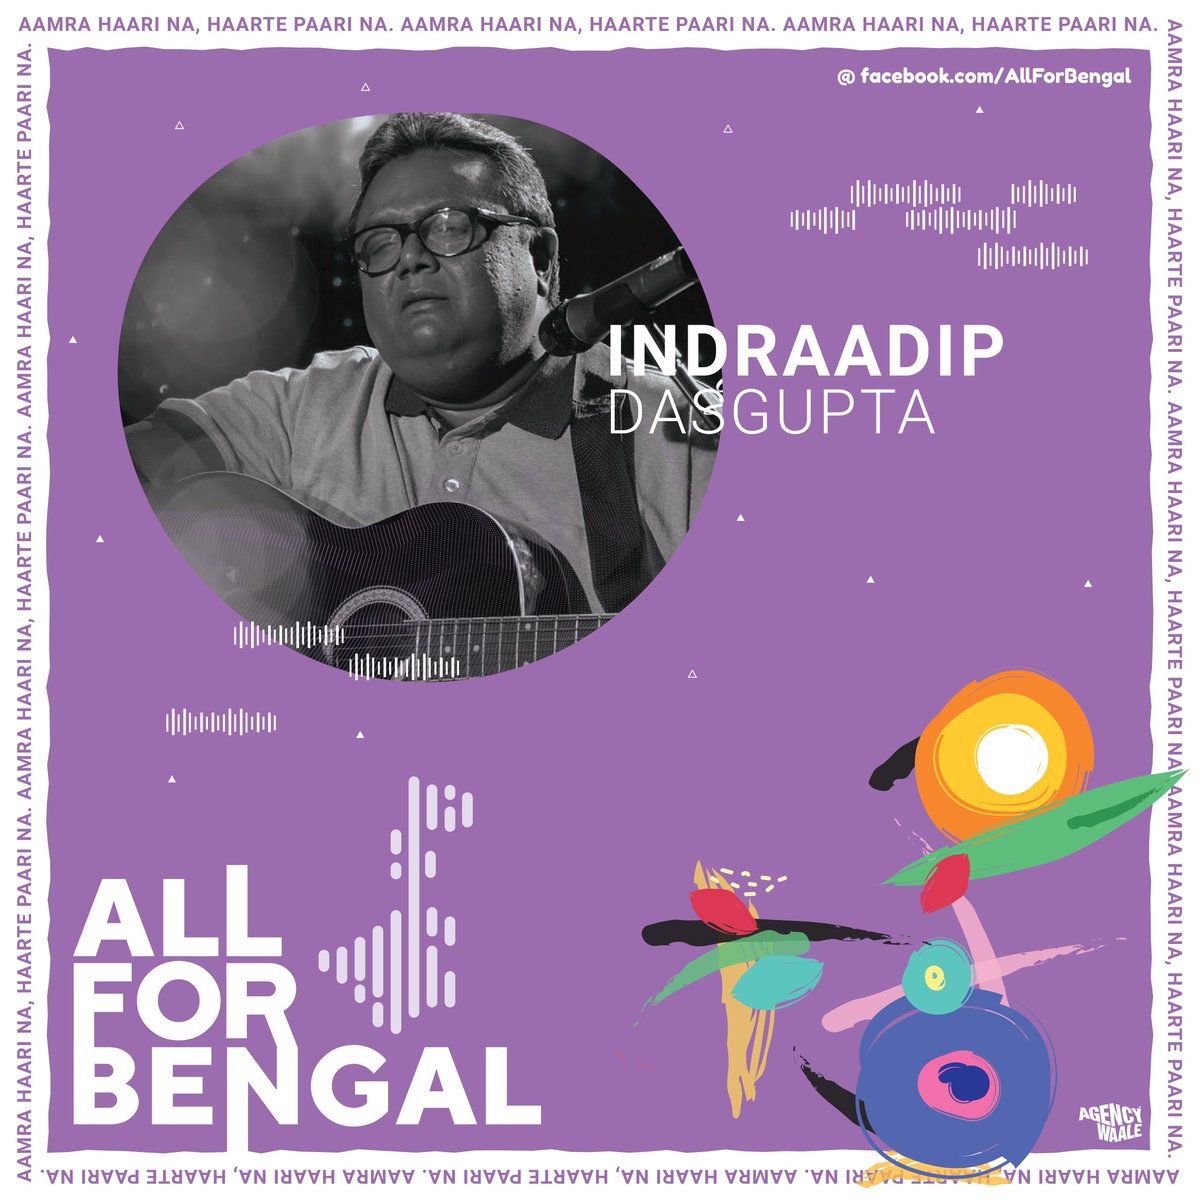 Prominent music composer,director #IndraadipDasGupta has come forward in support of All For Bengal to raise funds for the victims of #Corona and #Amphan in Bengal.

#AllForBengal